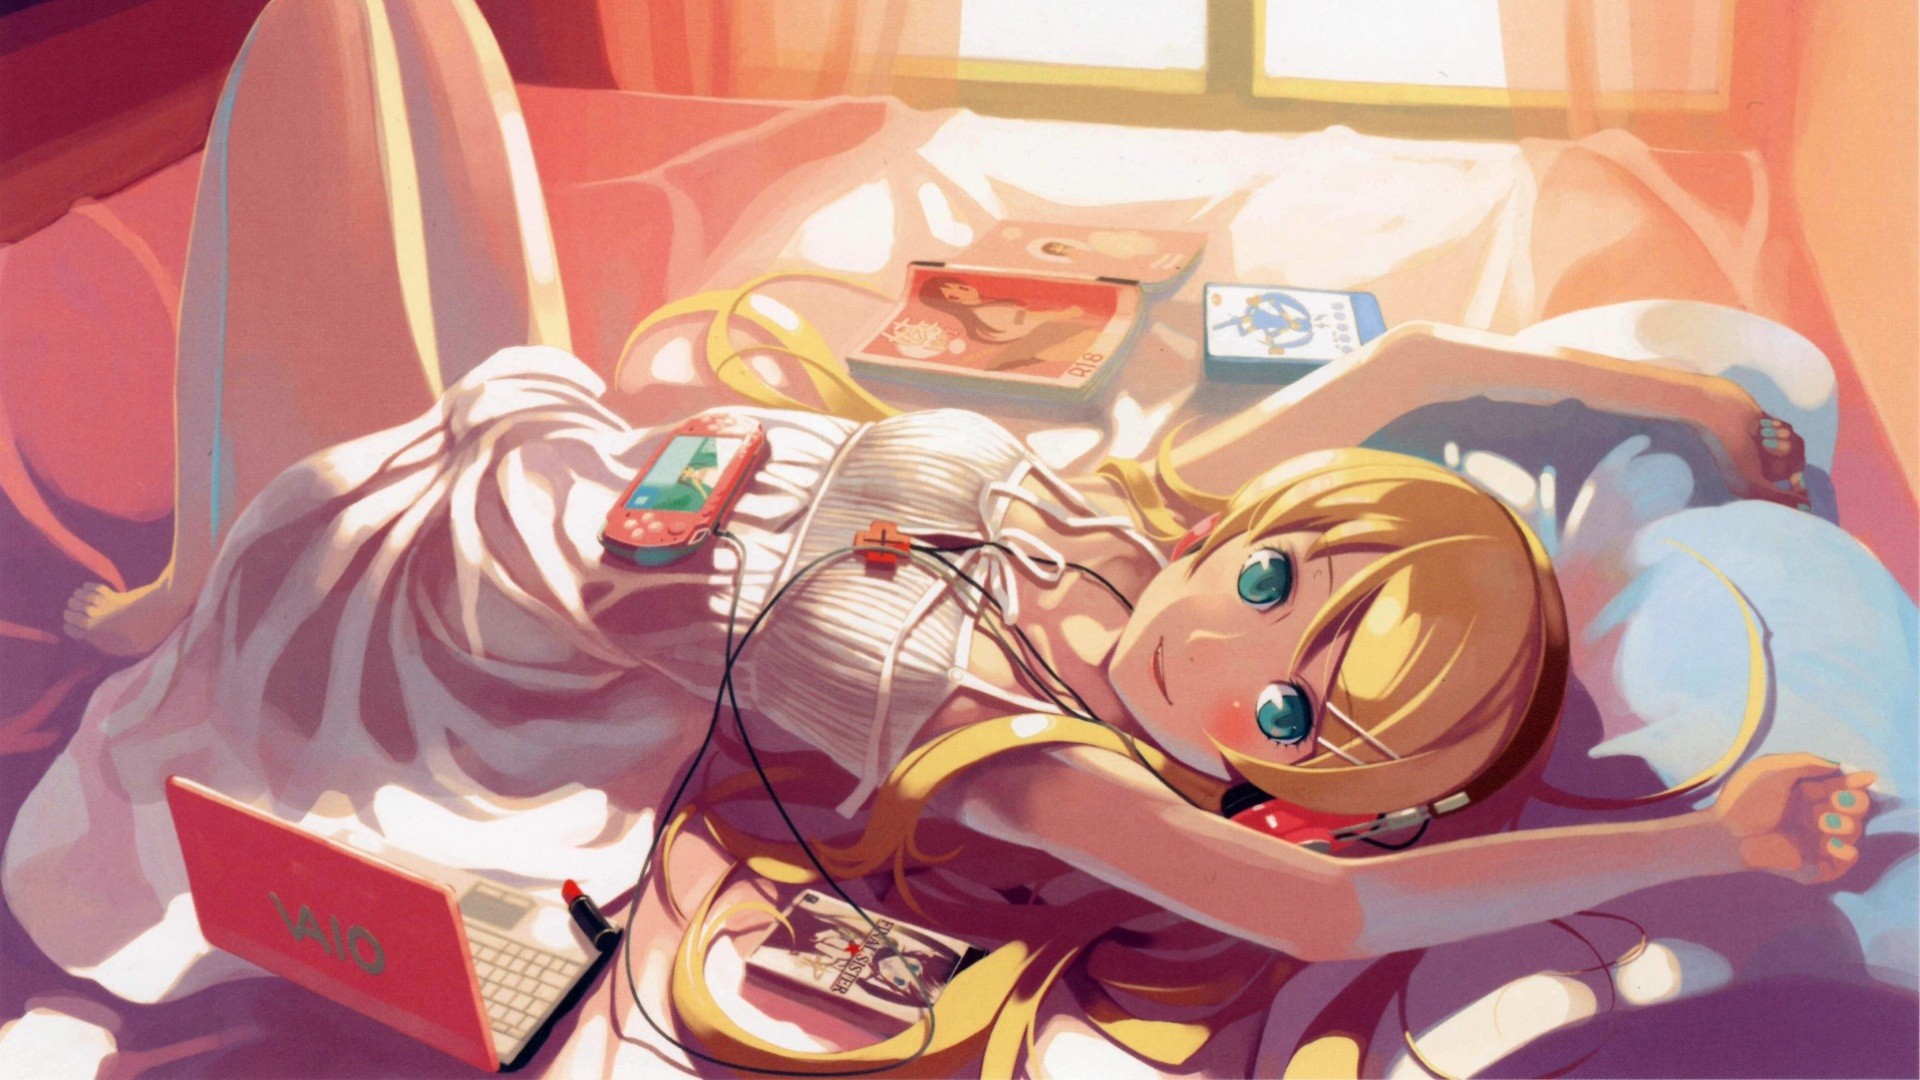 Anime Girls VAiO Laptop Blue Eyes Lying Down Dress White Dress Legs Legs Together Painted Nails Head 1920x1080